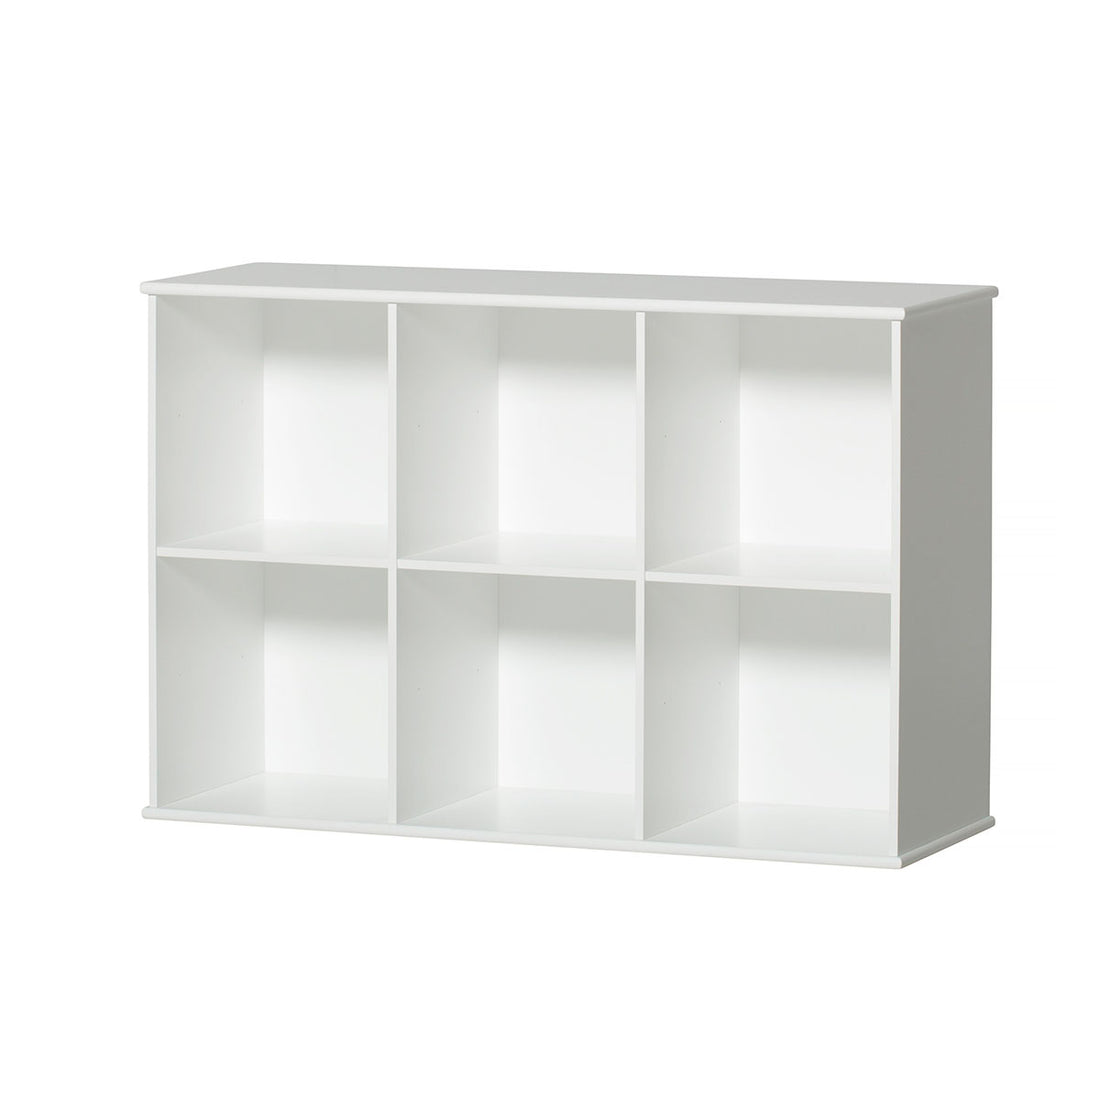 oliver-furniture-wood-wall-shelving-unit-3x2-horizontal-shelf-with-support- (2)